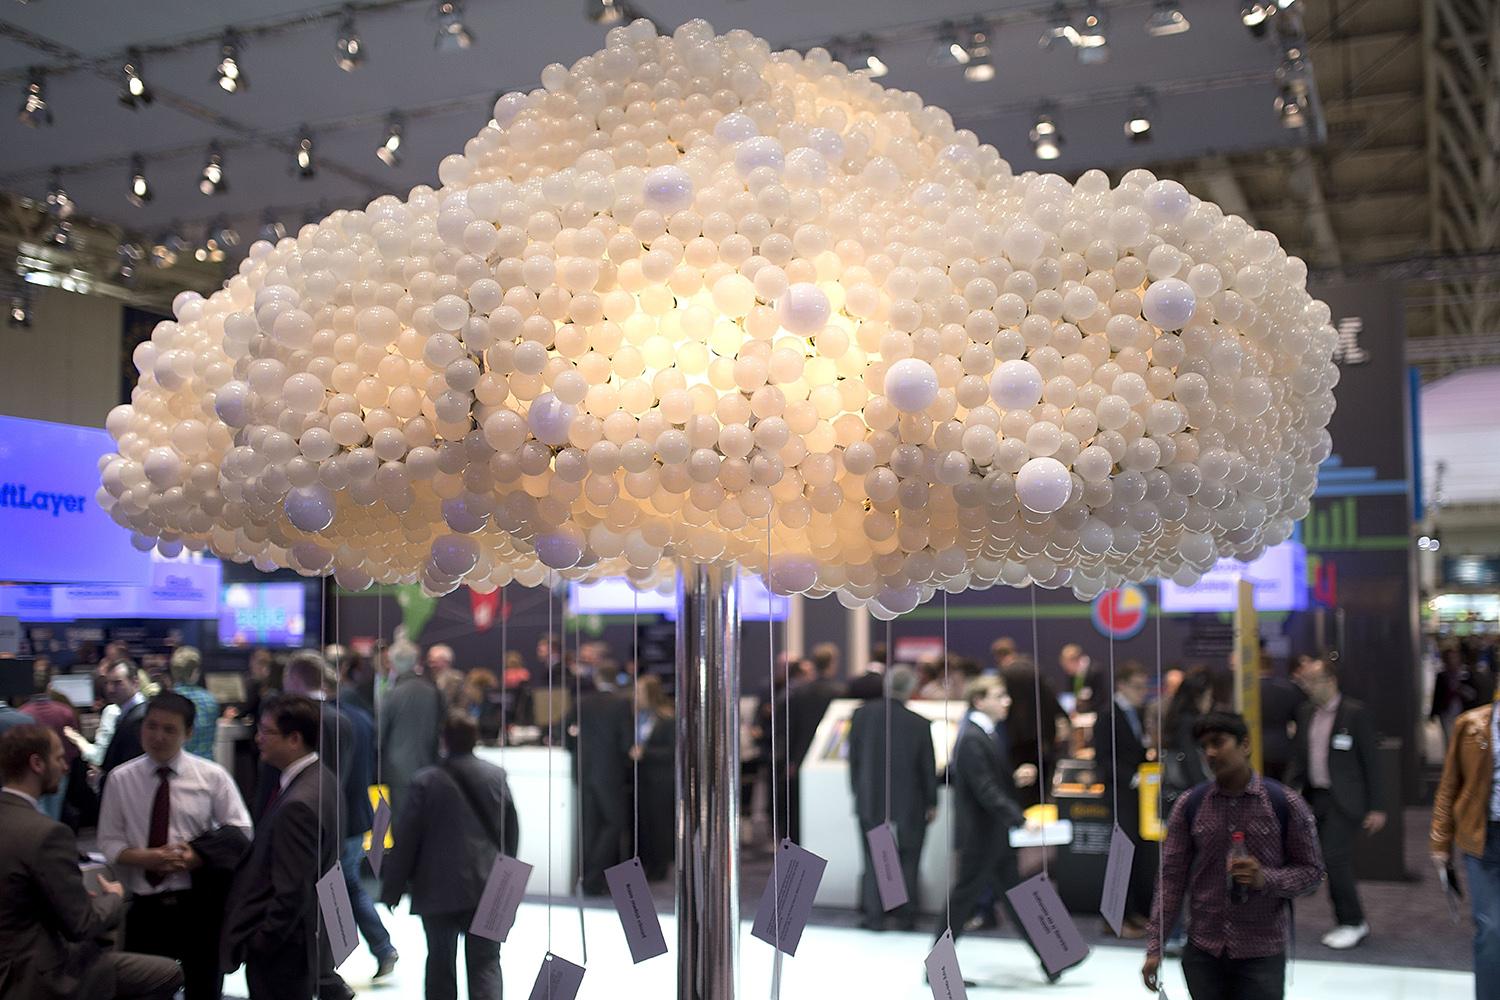 A symbolic data cloud is seen at the 2014 CeBIT technology trade fair on March 10, 2014, in Hanover, Germany. (Photo by Nigel Treblin/Getty Images)